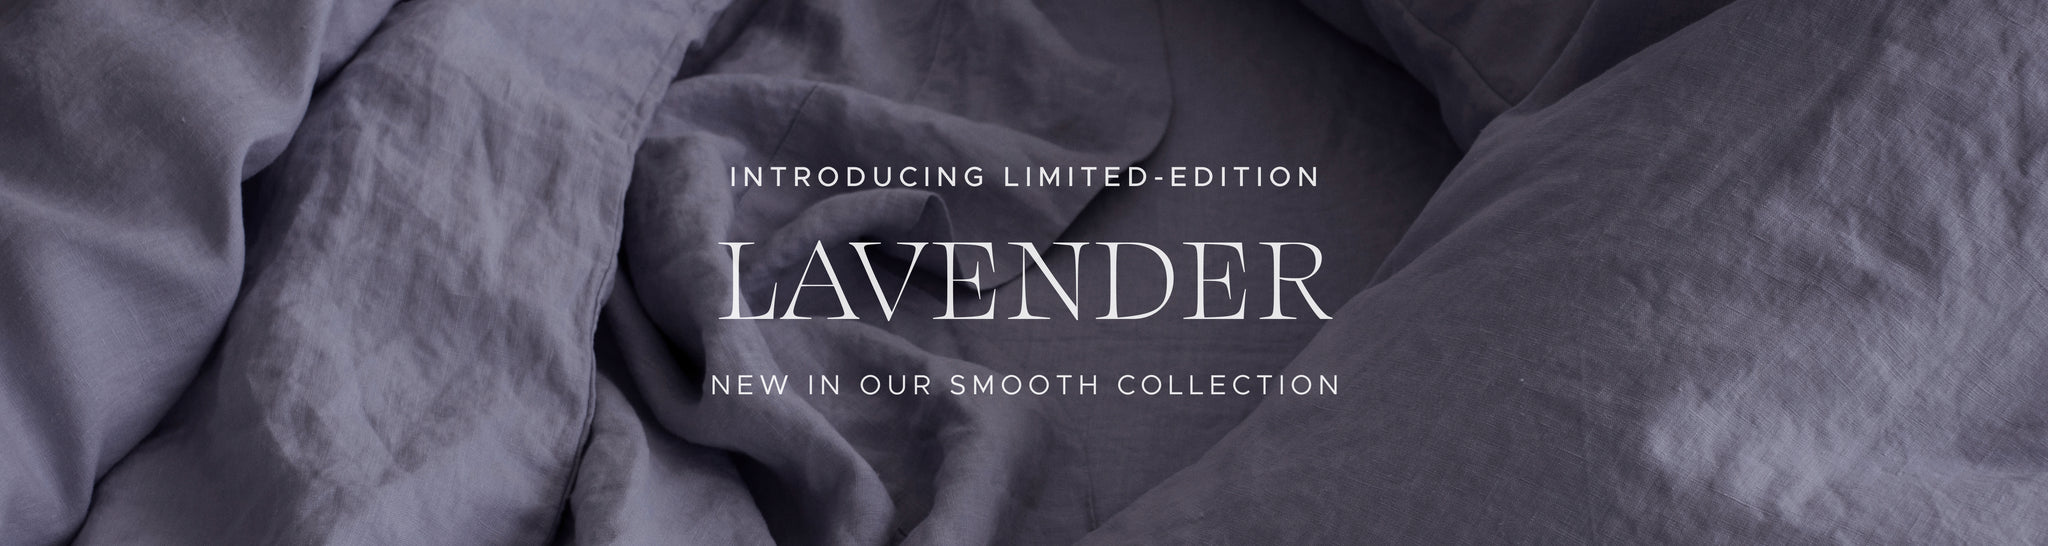 INTRODUCING LIMITED-EDITION Lavender NEW IN OUR SMOOTH COLLECTION